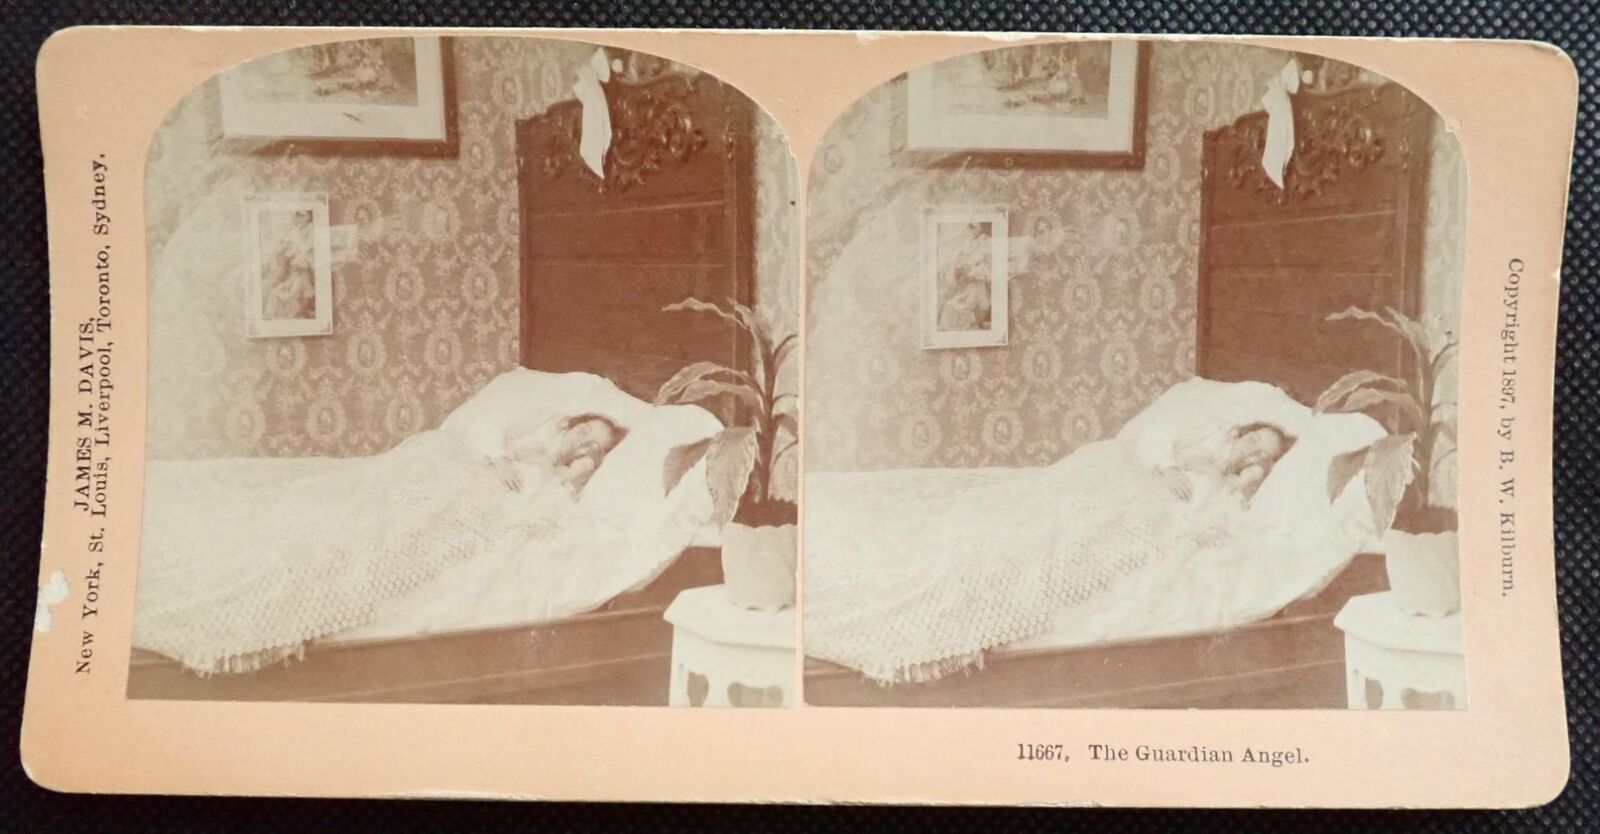 ANTIQUE Real Photo Kilburn Stereoview The Guardian Angel Sleeping Child and Doll